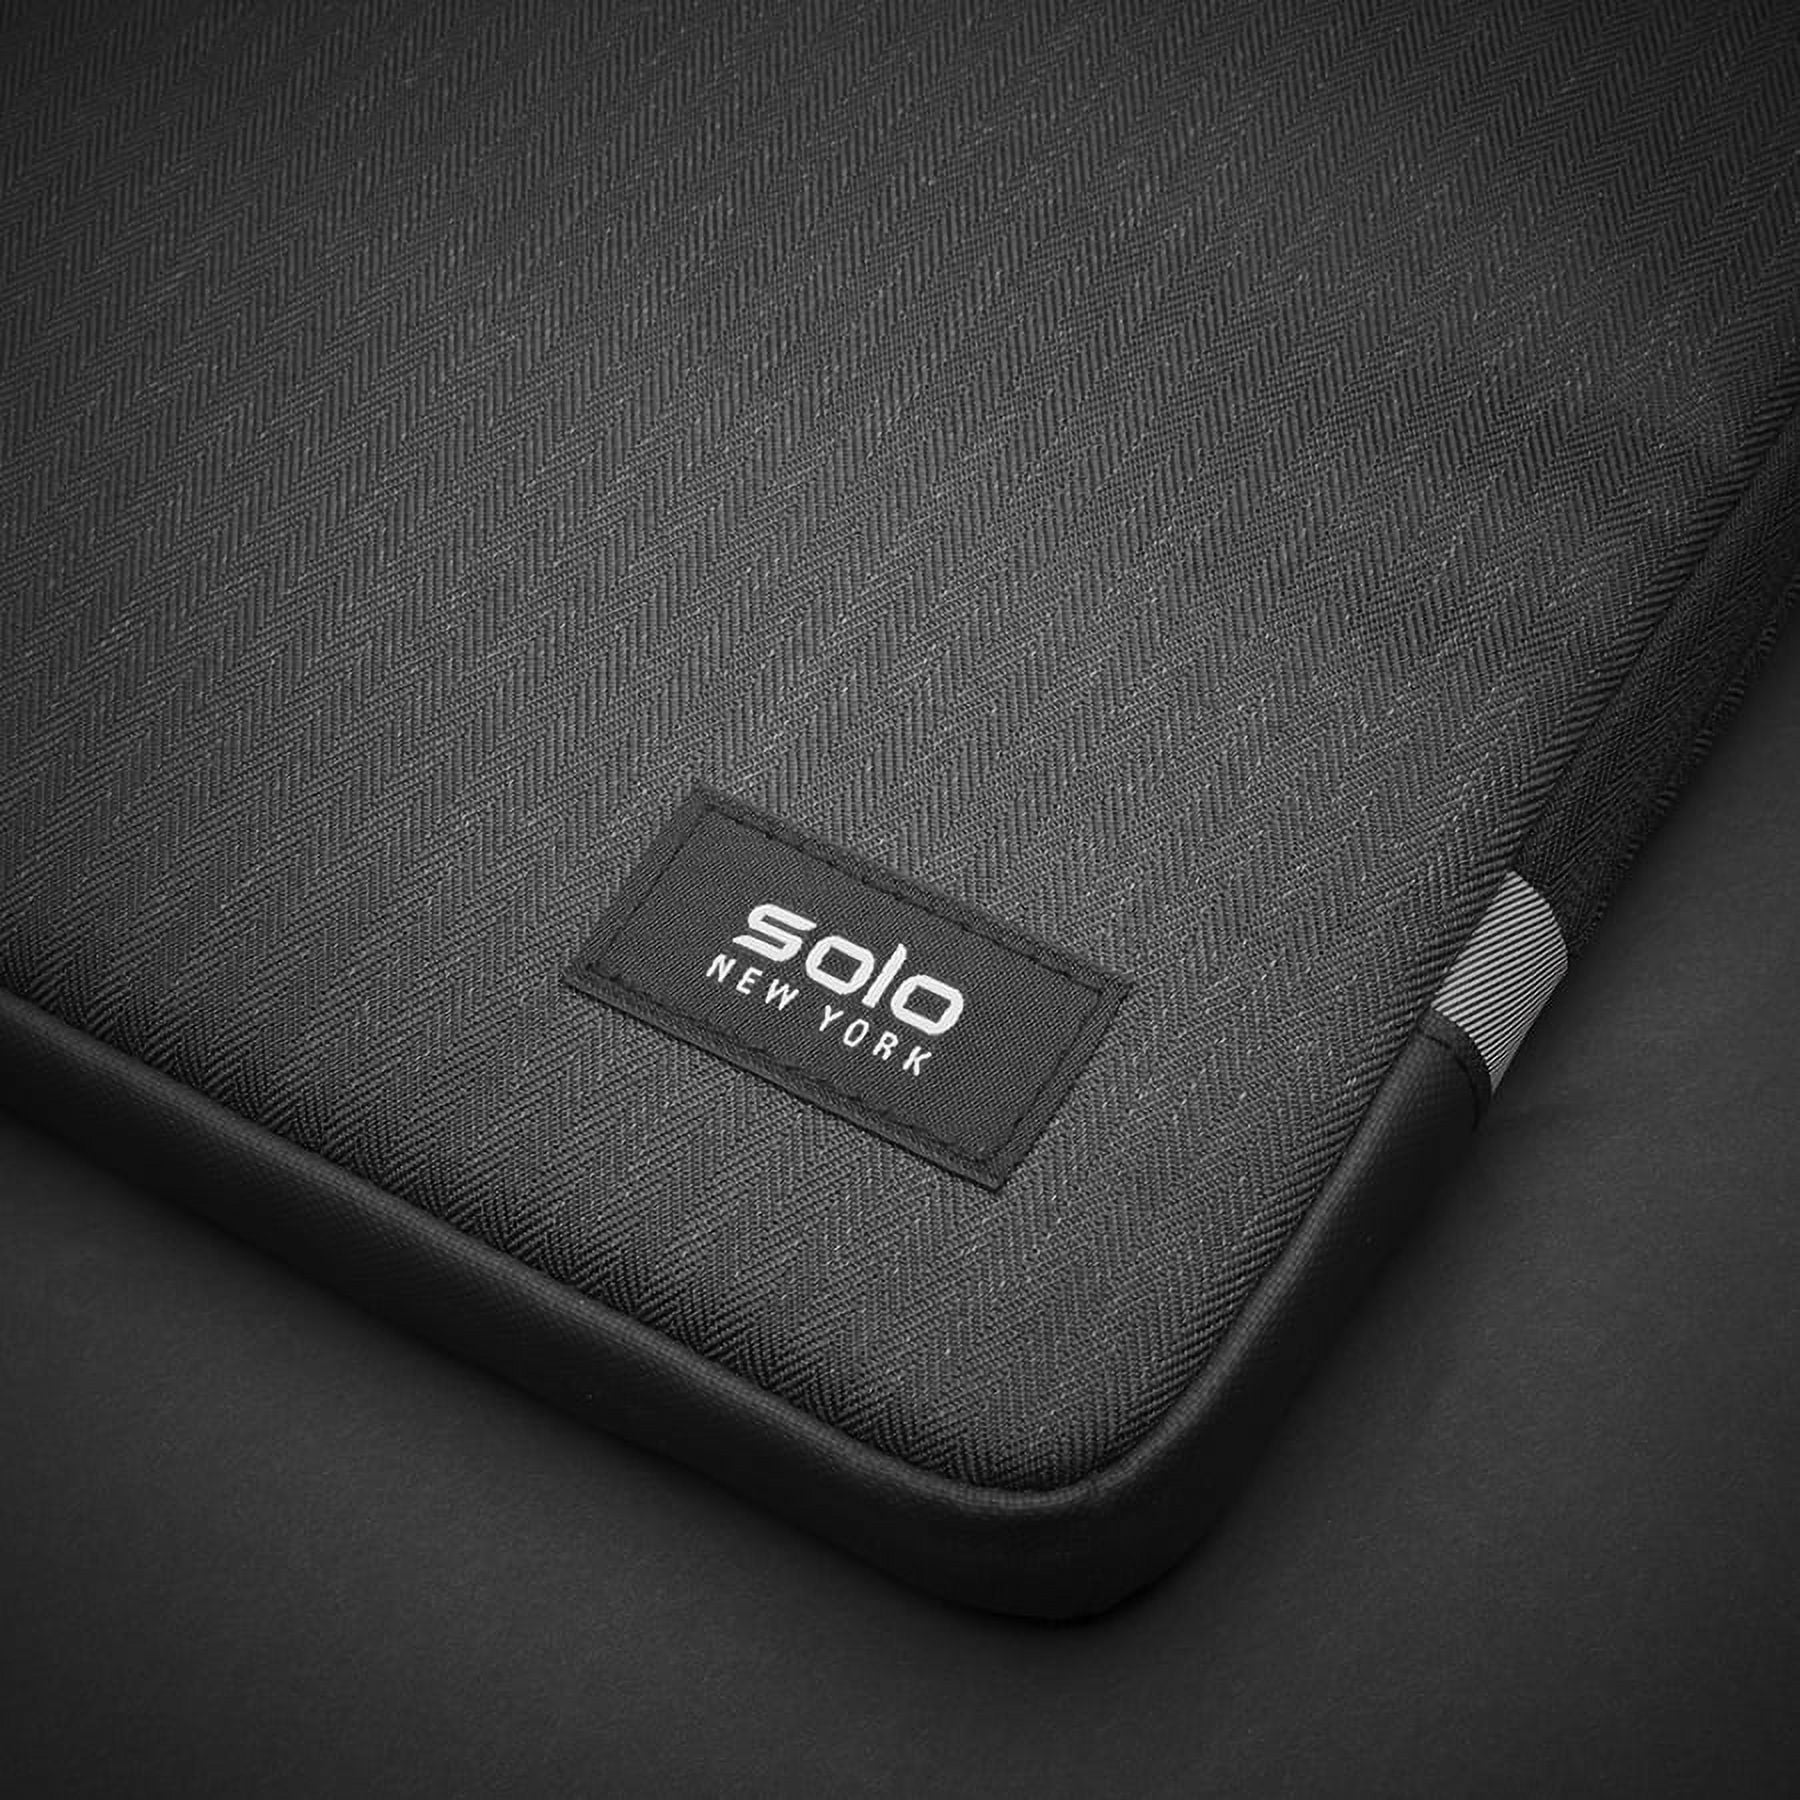 Solo Focus Carrying Case (Sleeve) for 15.6 Notebook - Gray